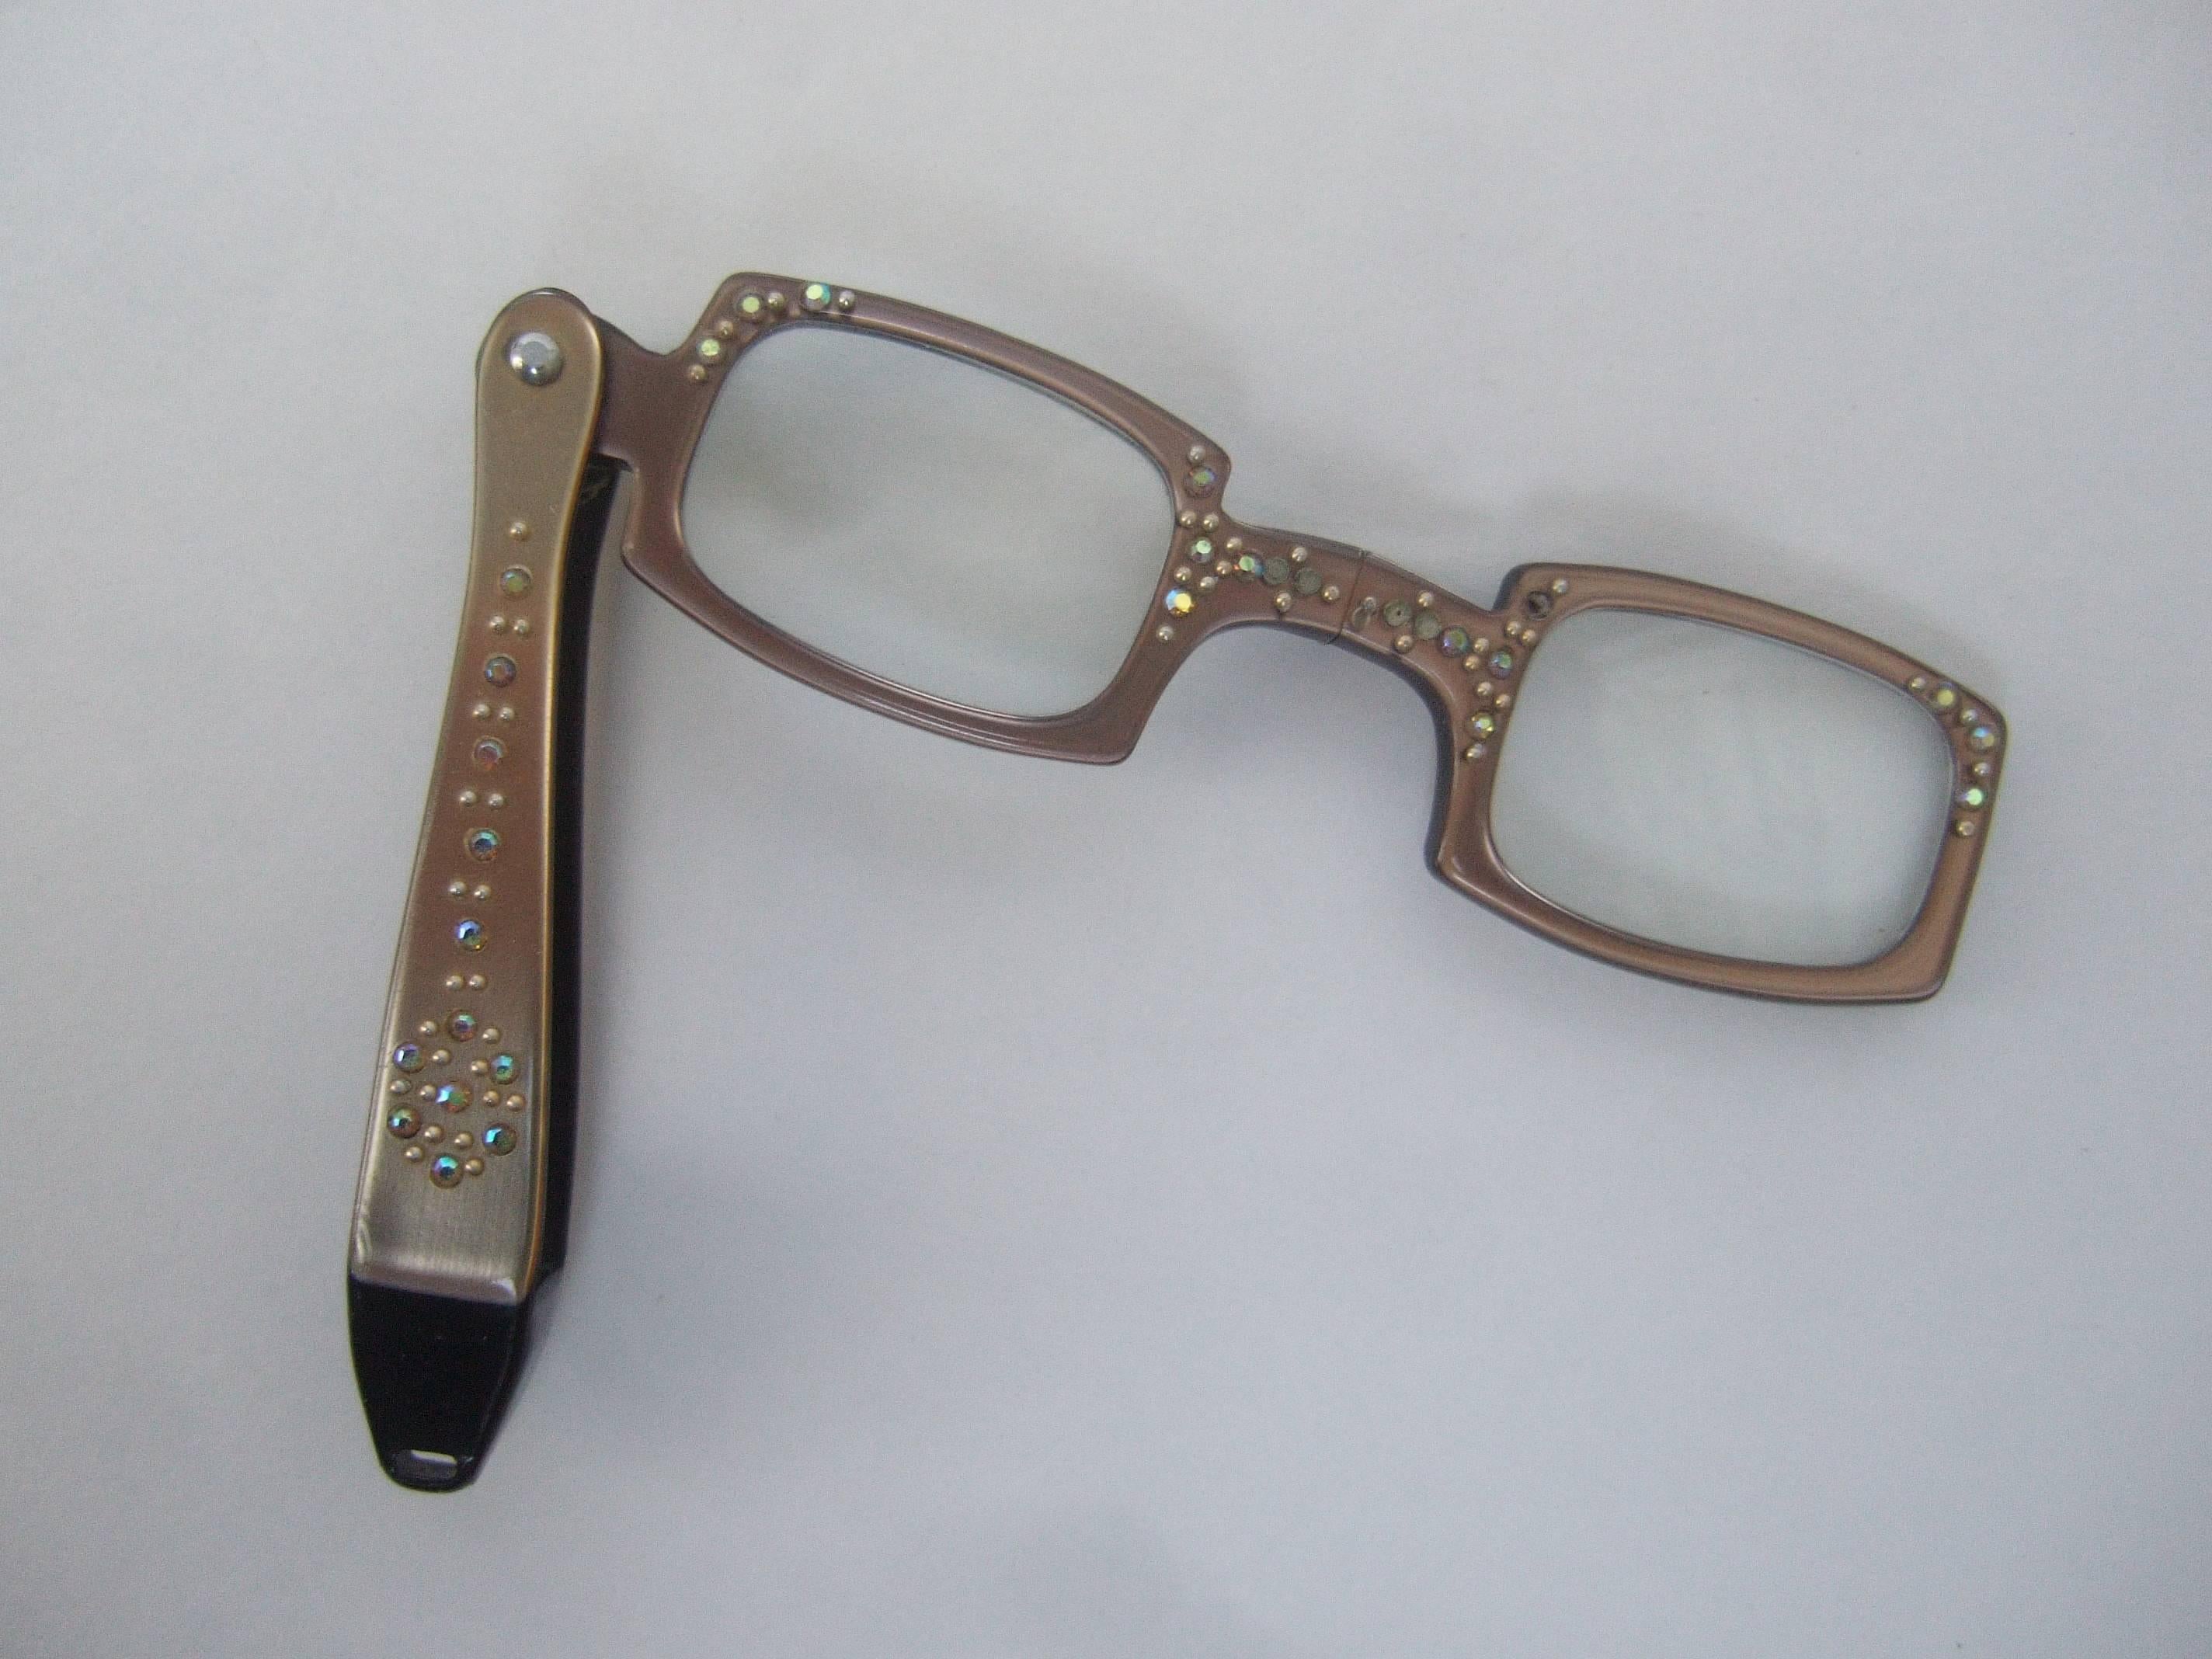 Opulent lucite crystal embellished diminutive opera glasses
The elegant tiny opera glasses are embellished
with sprinkles of glittering crystals embedded on 
the bronze lucite frame

The tiny eye glasses make a charming accessory
for the opera